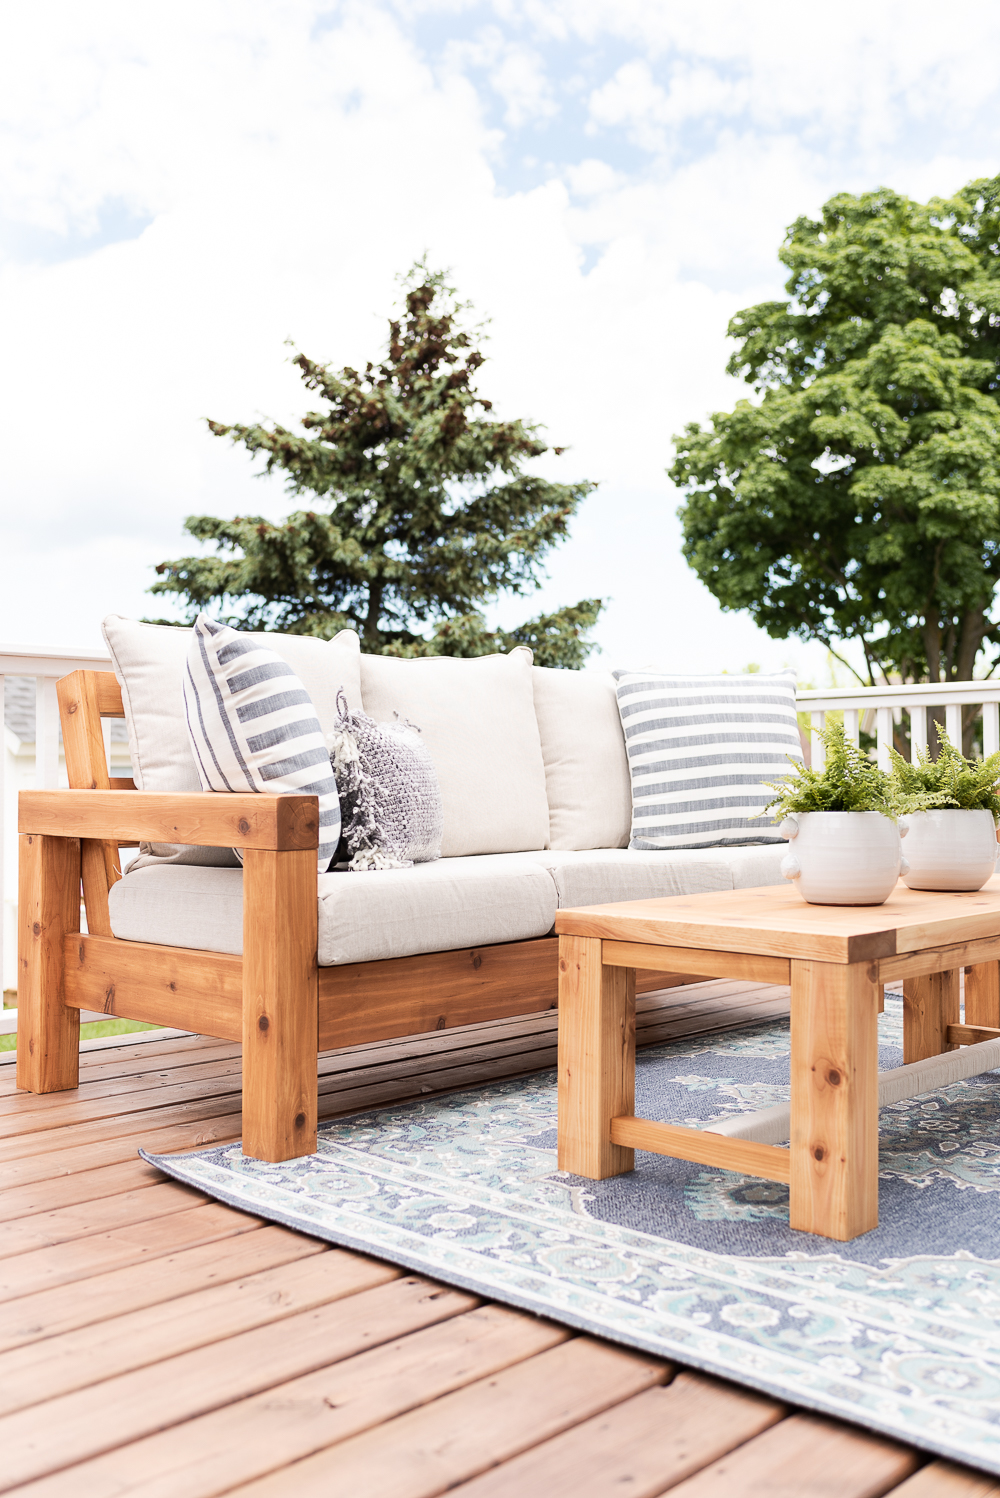 The Perfect Outdoor Sofa | Free Plans - Nick + Alicia